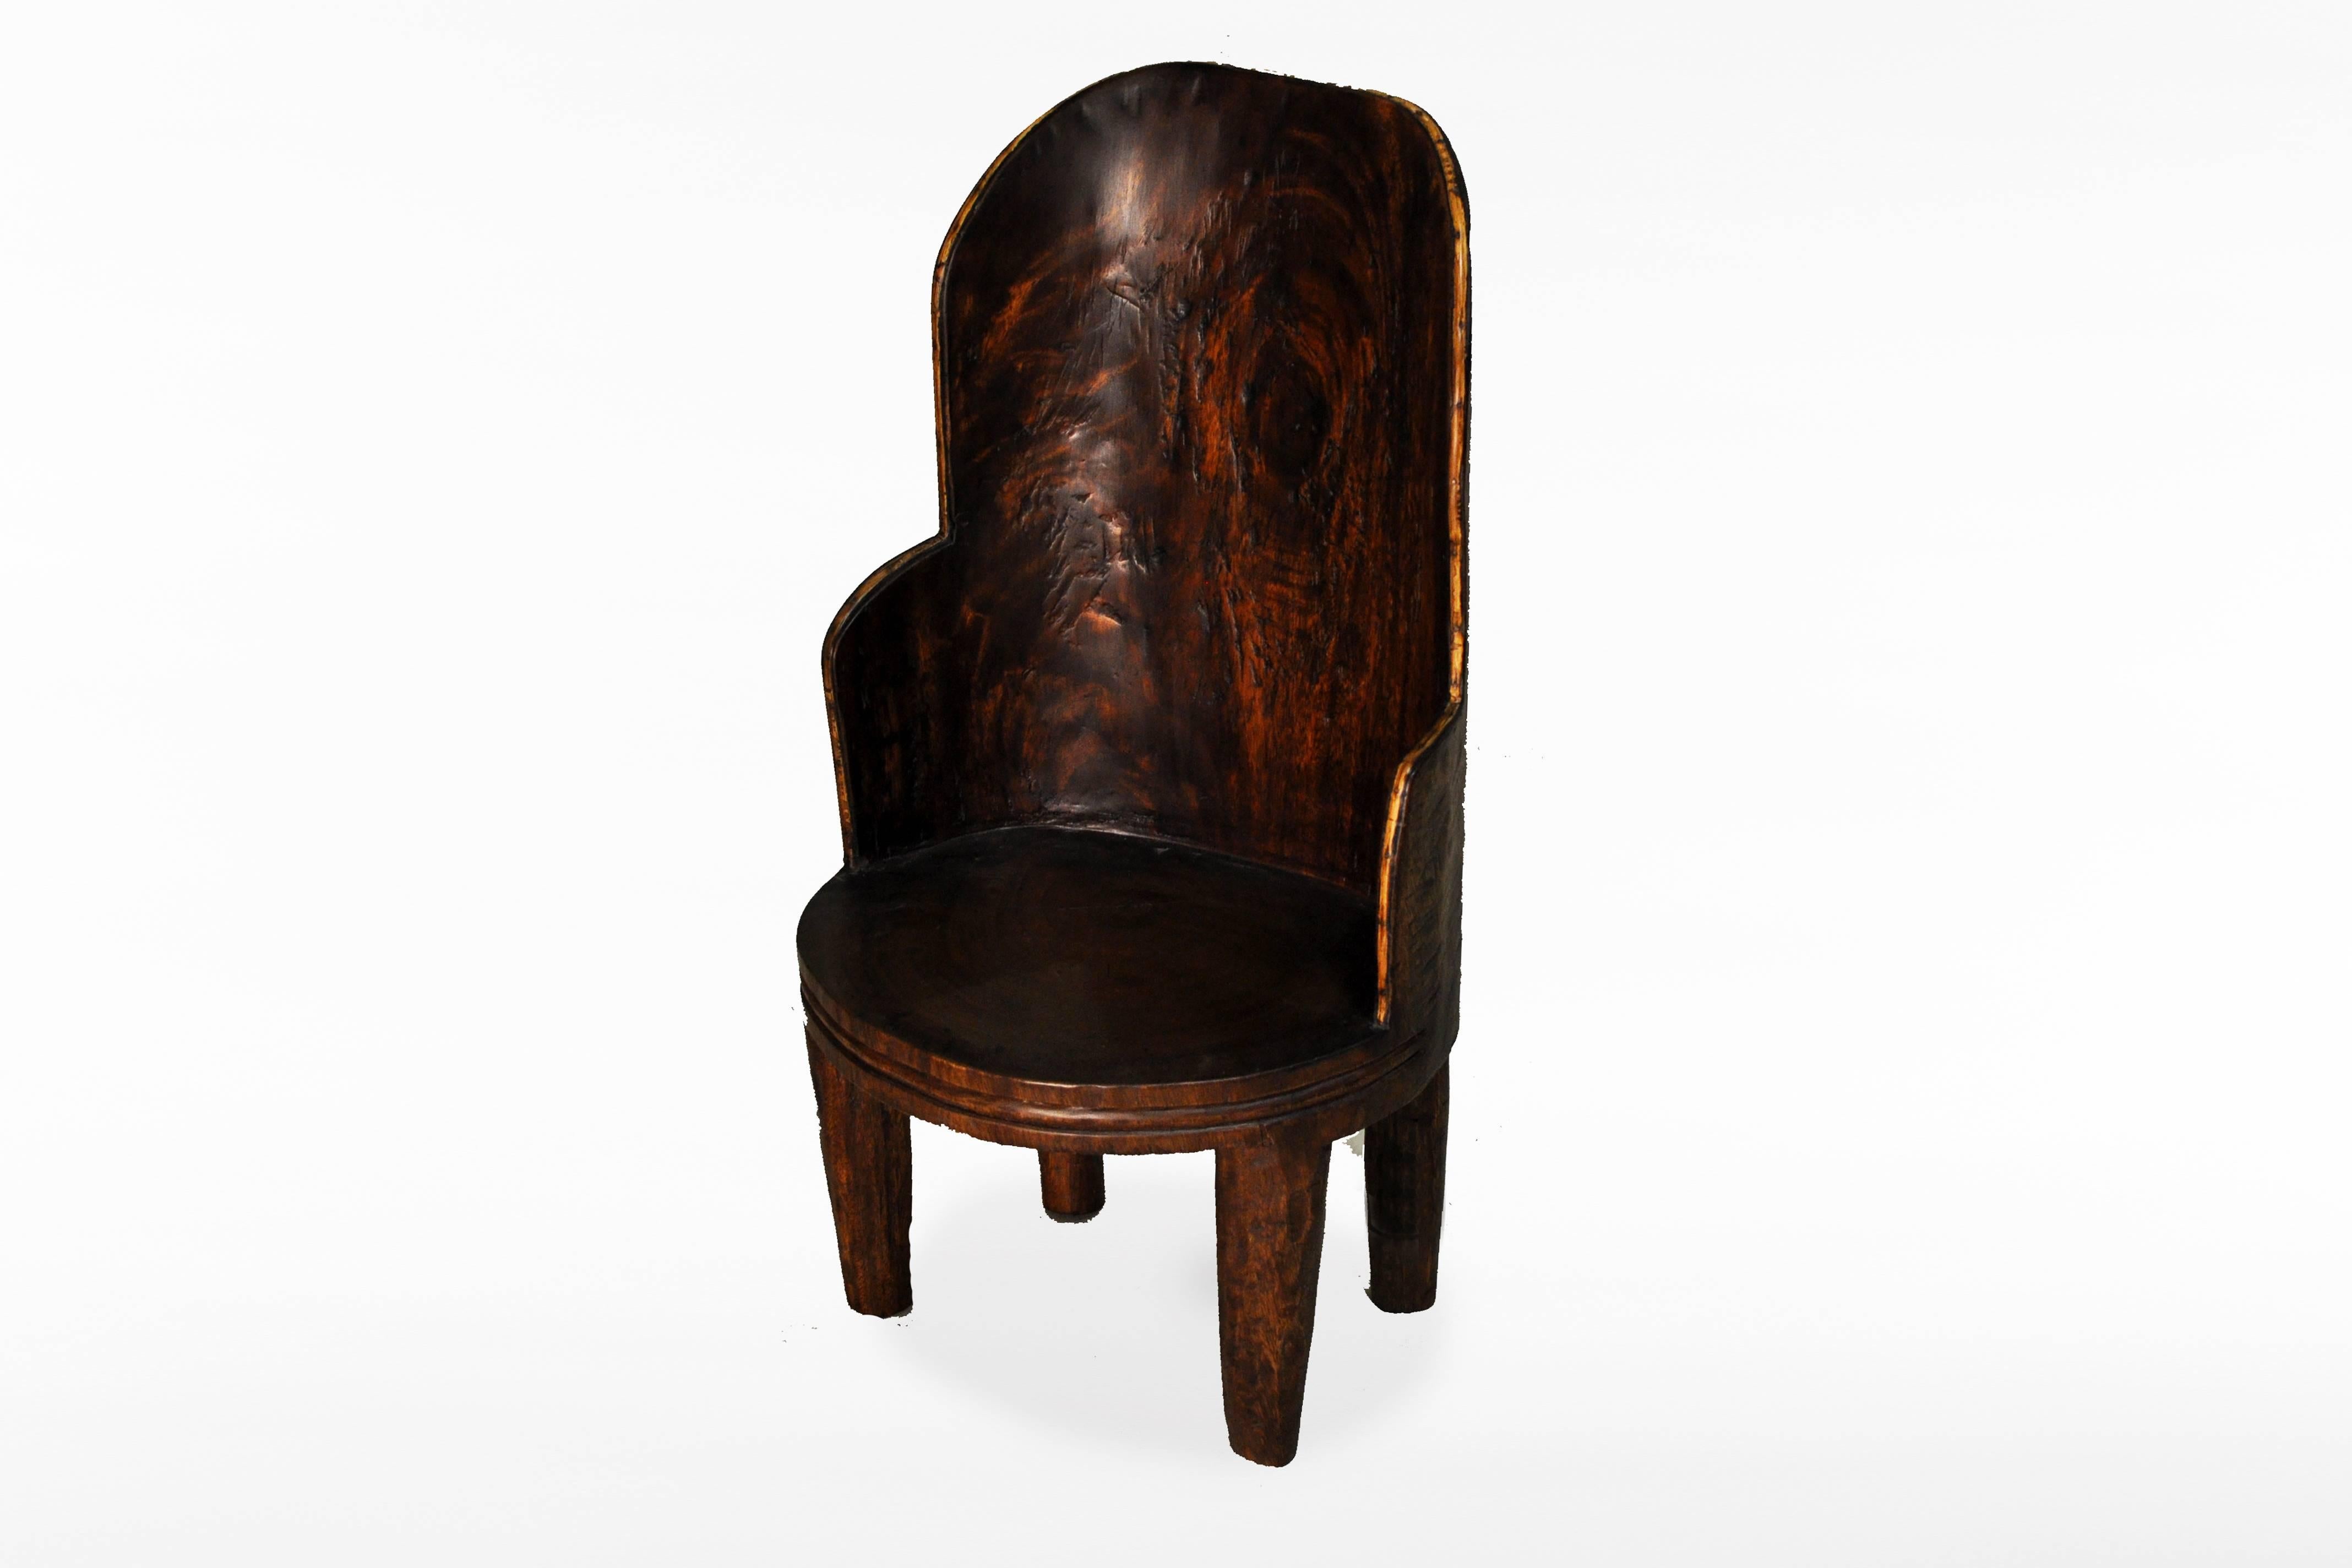 This Naga tribe style chair is from Thailand and is made from chamcha wood.